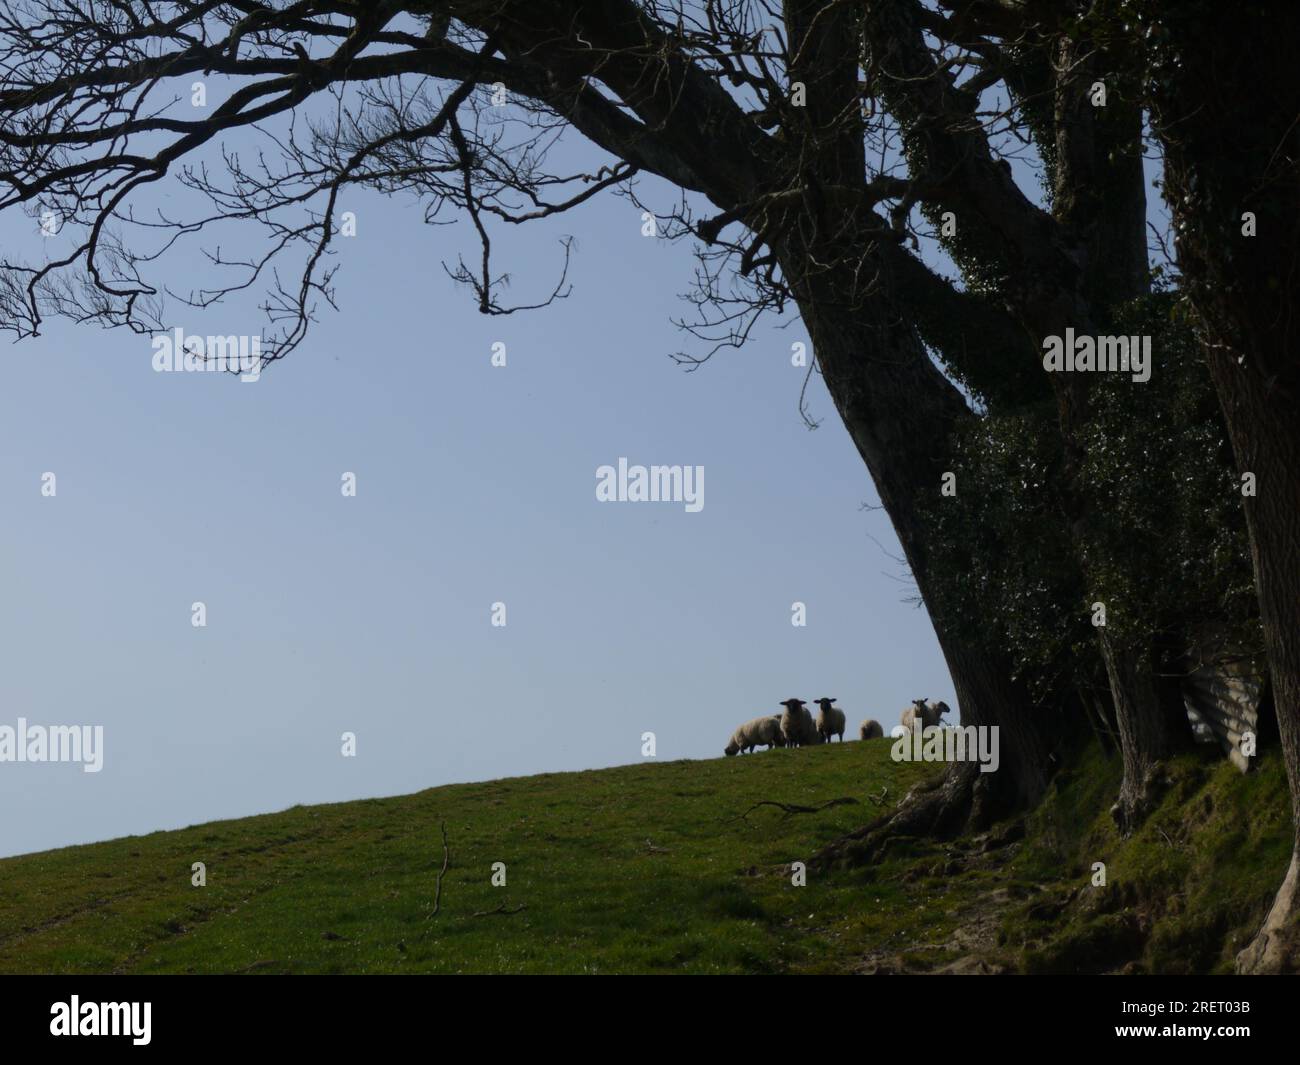 Cornwall, UK, Spring 2022: 'Nosy Neighbours'. A flock of sheep gathered under a tree look towards the camera. Stock Photo